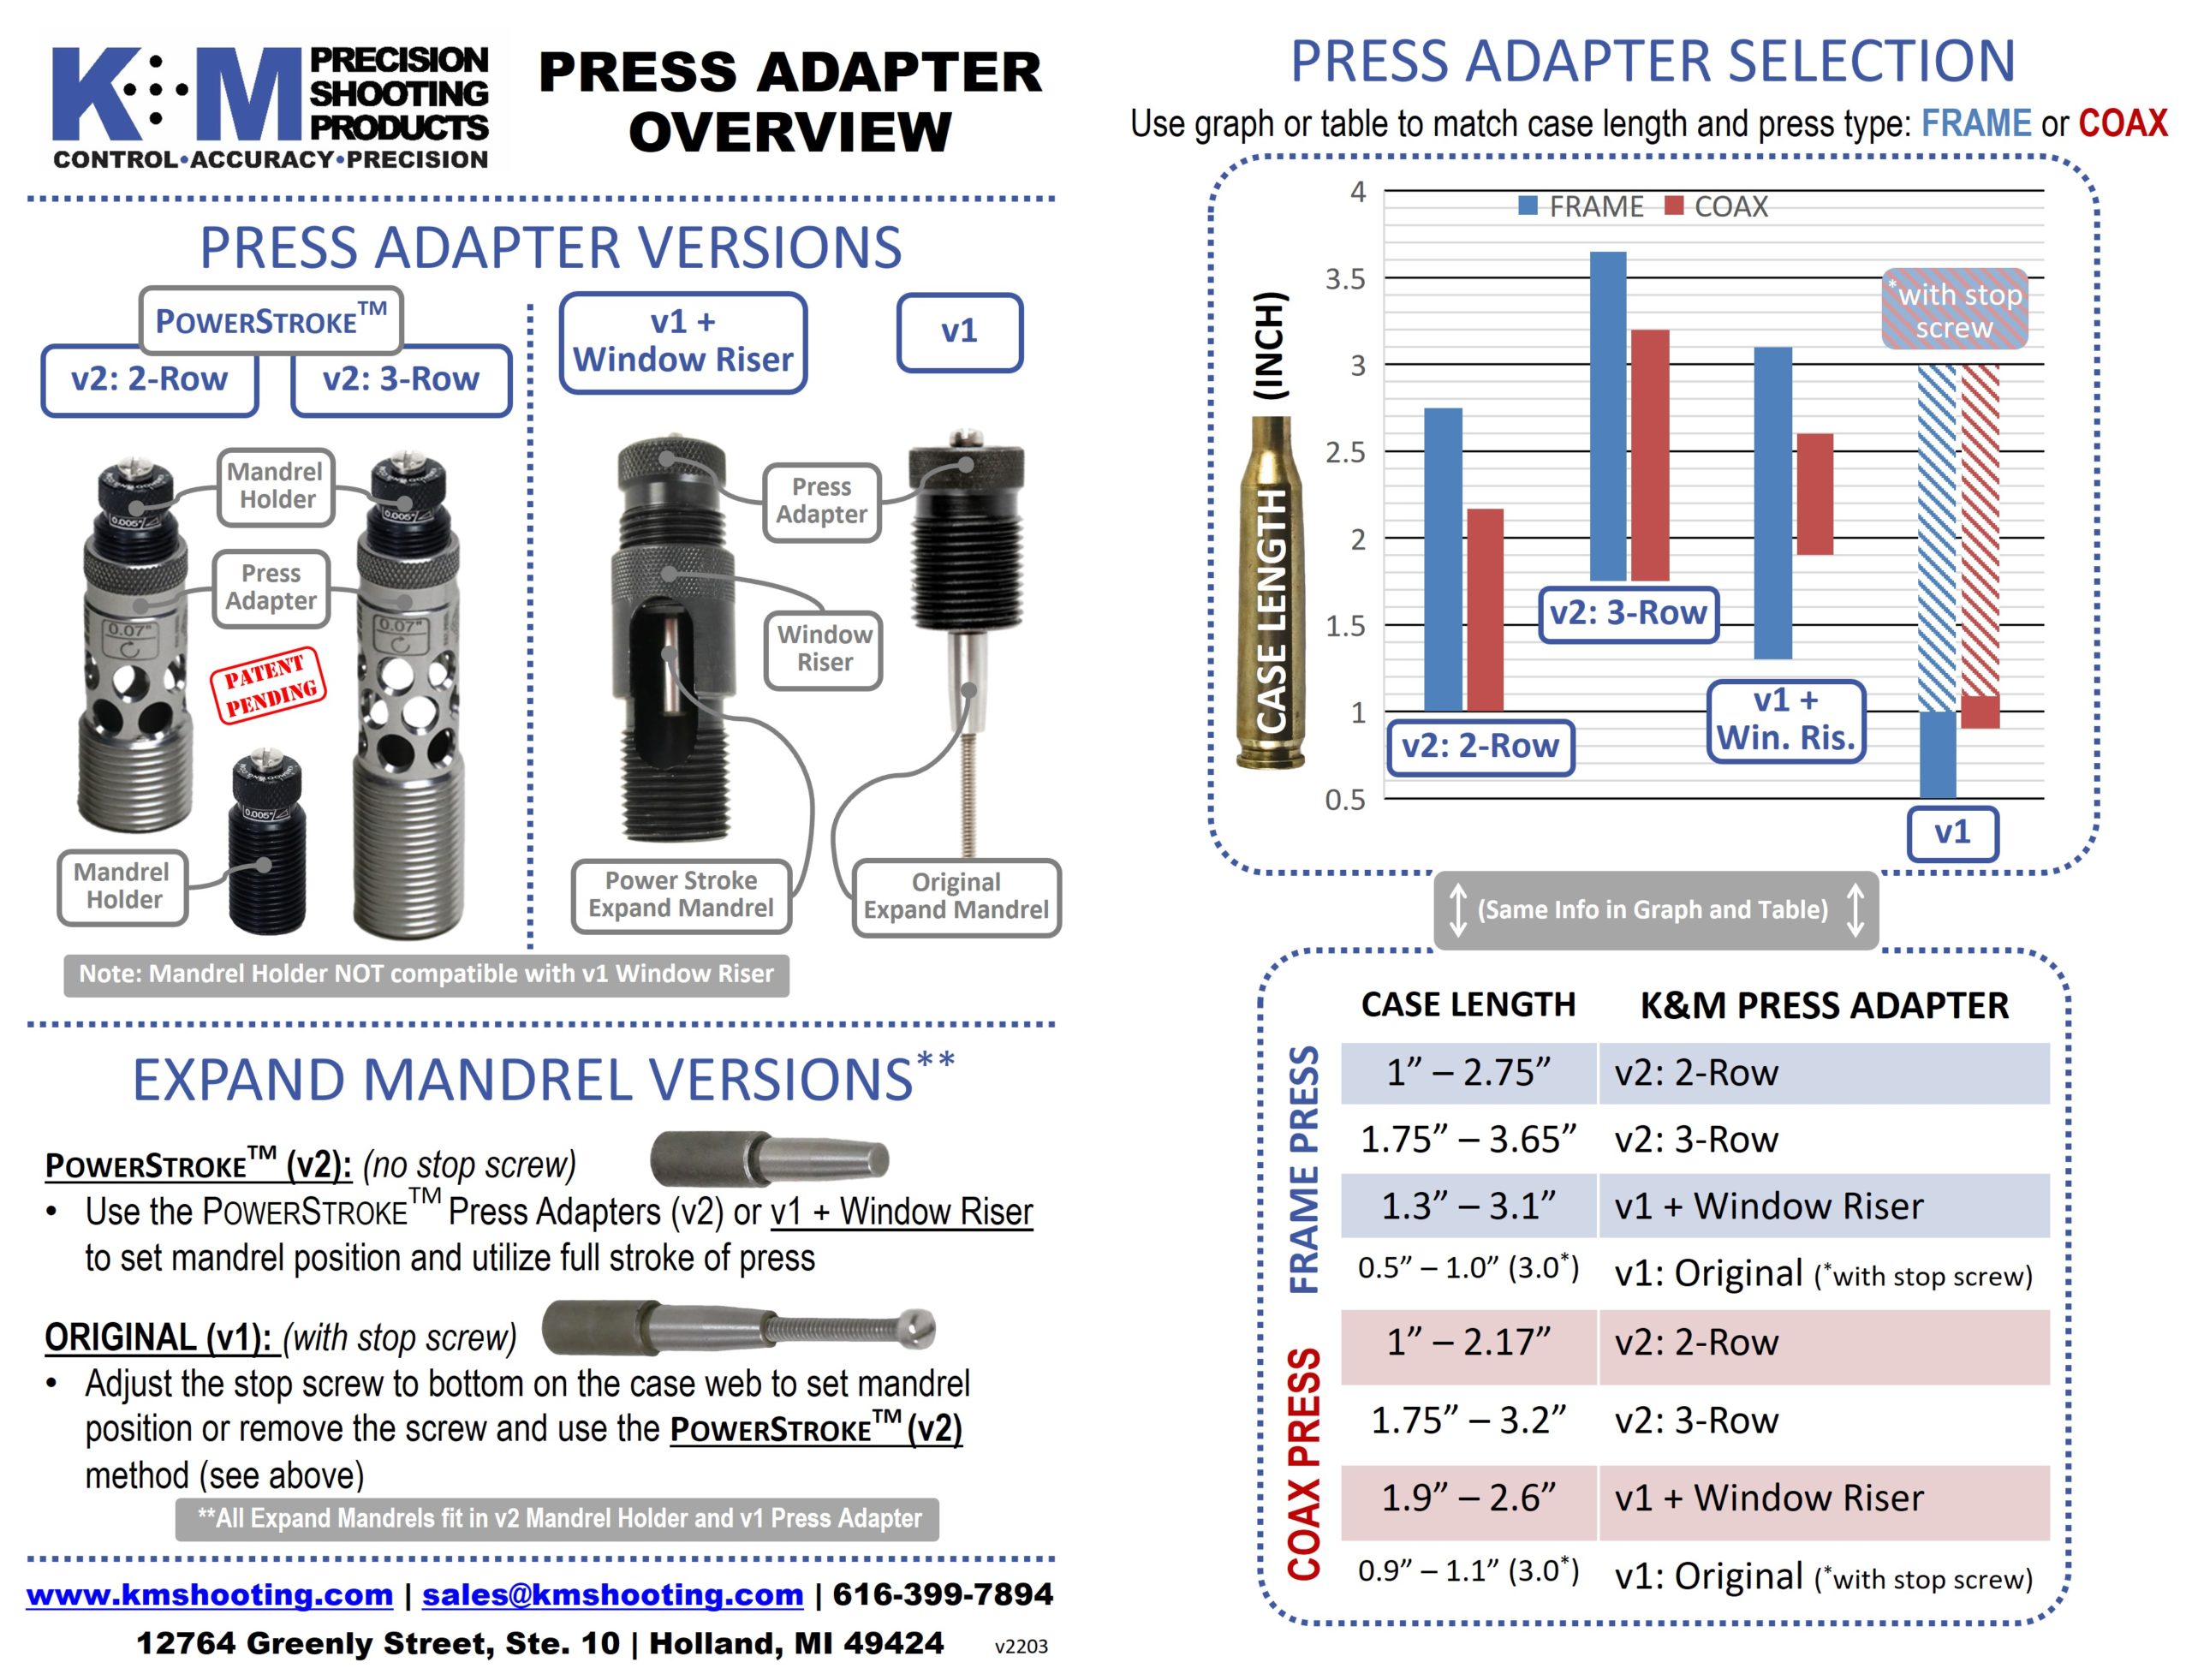 Press-Adapter-Overview.v2203-scaled.jpg